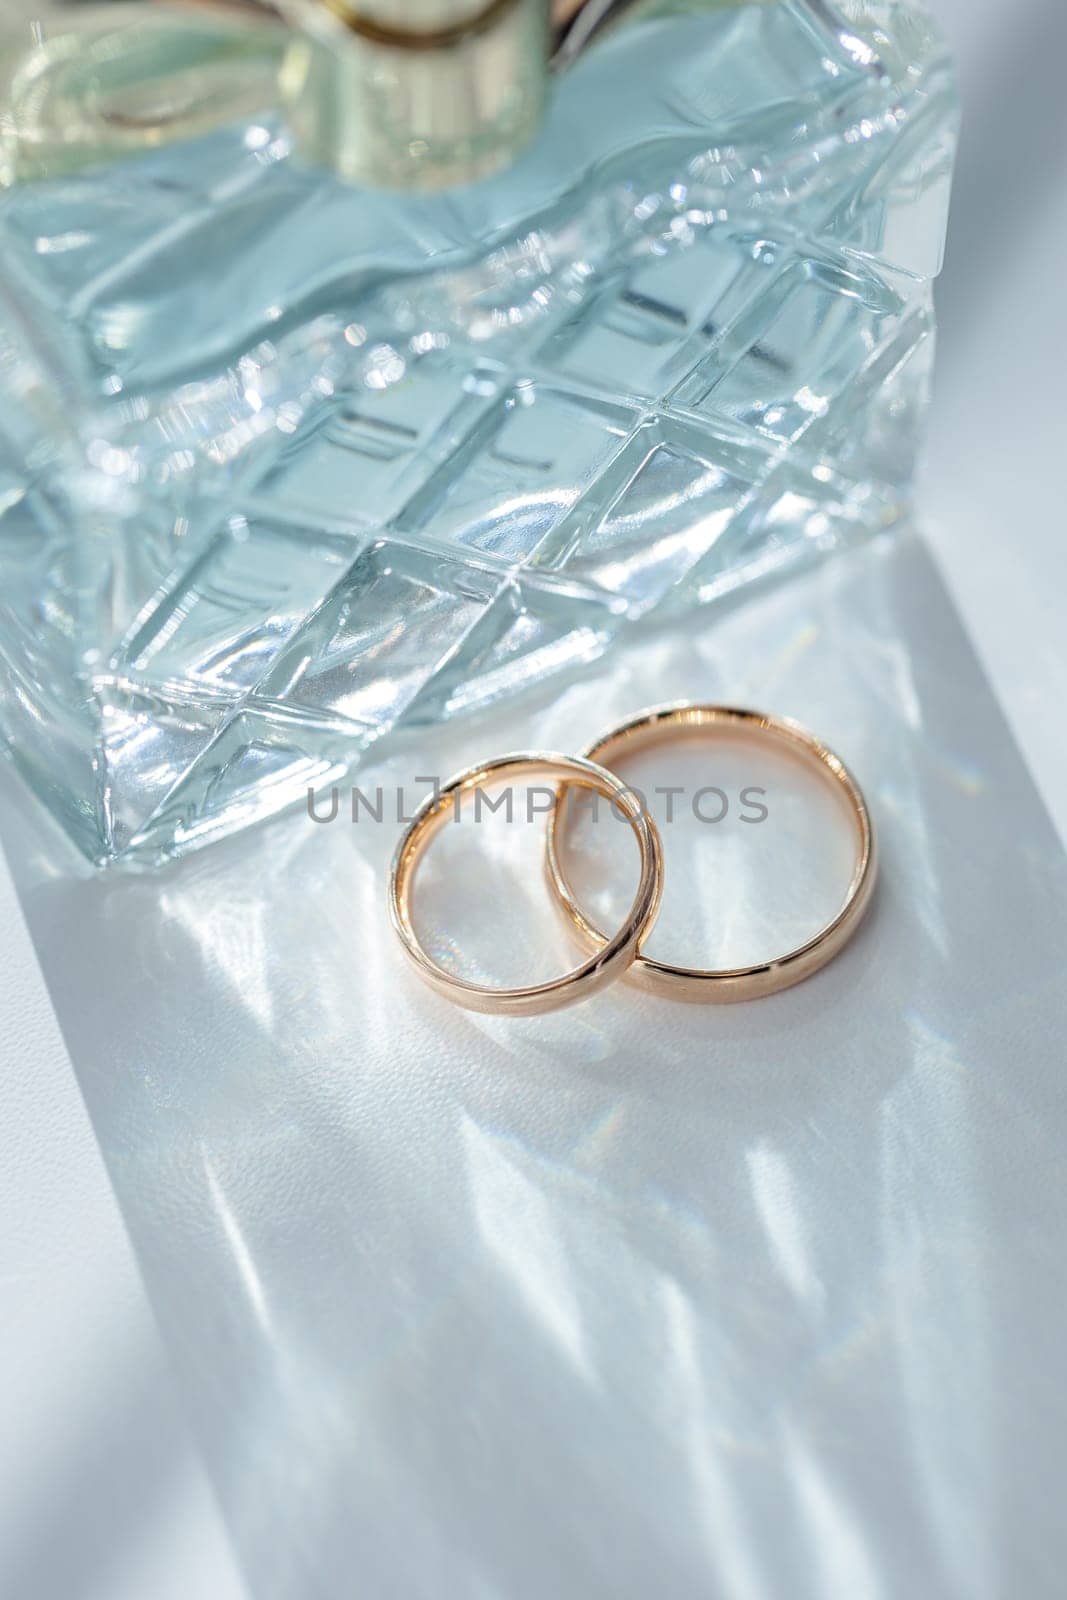 Wedding rings with yellow gold, set of wedding rings. by Dmitrytph